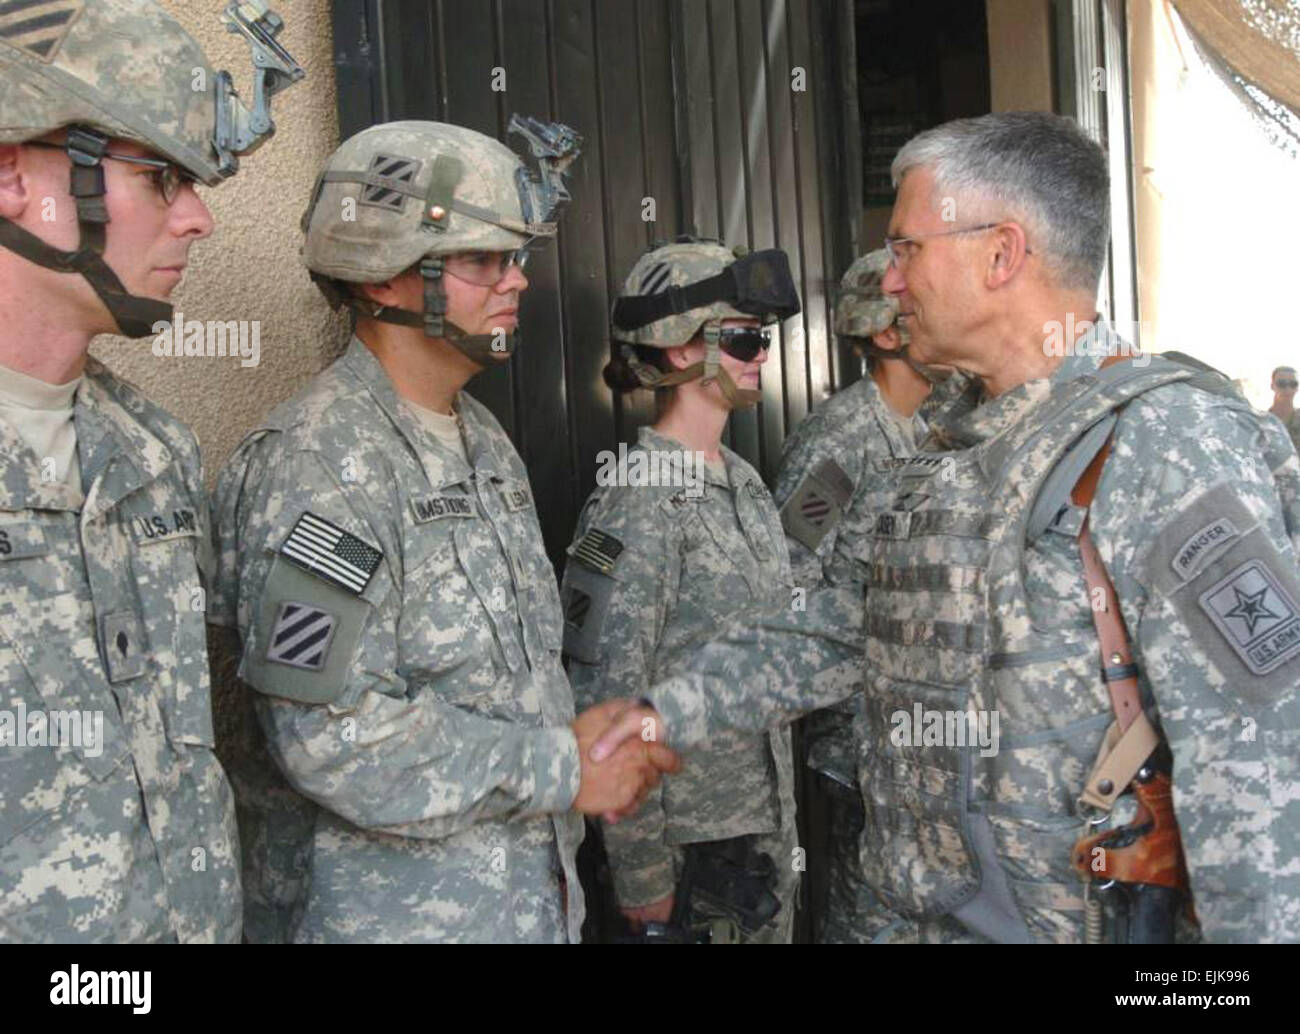 Army Chief of Staff Gen. George W. Casey Jr. presents Spc. Chris Armstrong, Headquarters Company, 1st Battalion, 15th Infantry Regiment, with a coin Aug. 11, at Patrol Base Assassin, Iraq. Gen. Casey visited Soldiers in Iraq and Afghanistan last week. Stock Photo